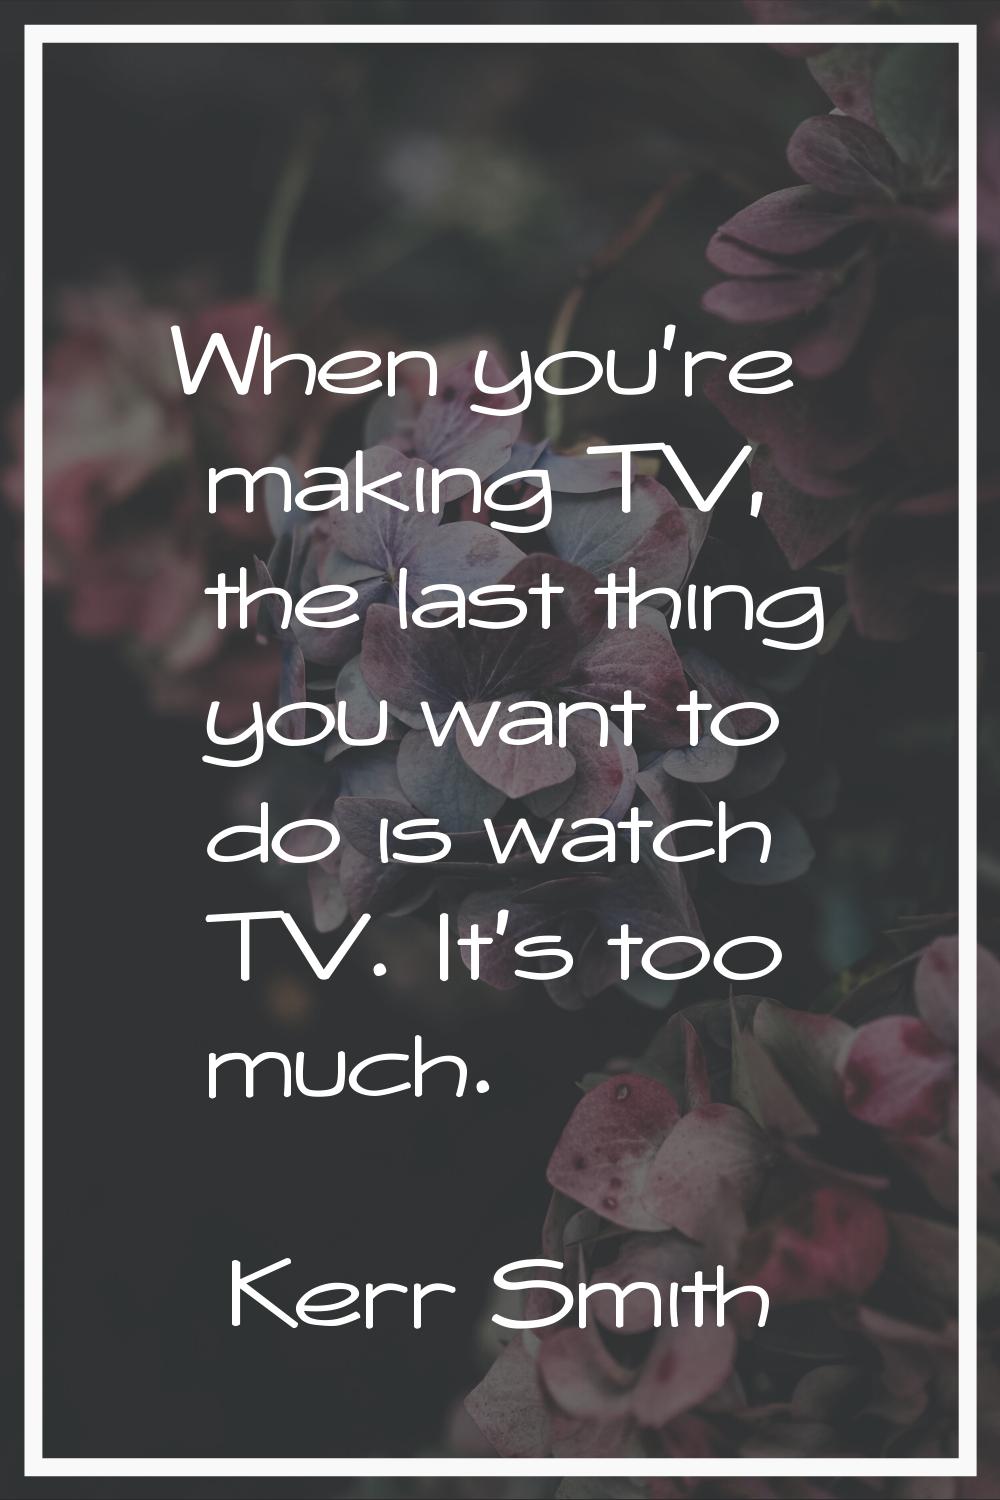 When you're making TV, the last thing you want to do is watch TV. It's too much.